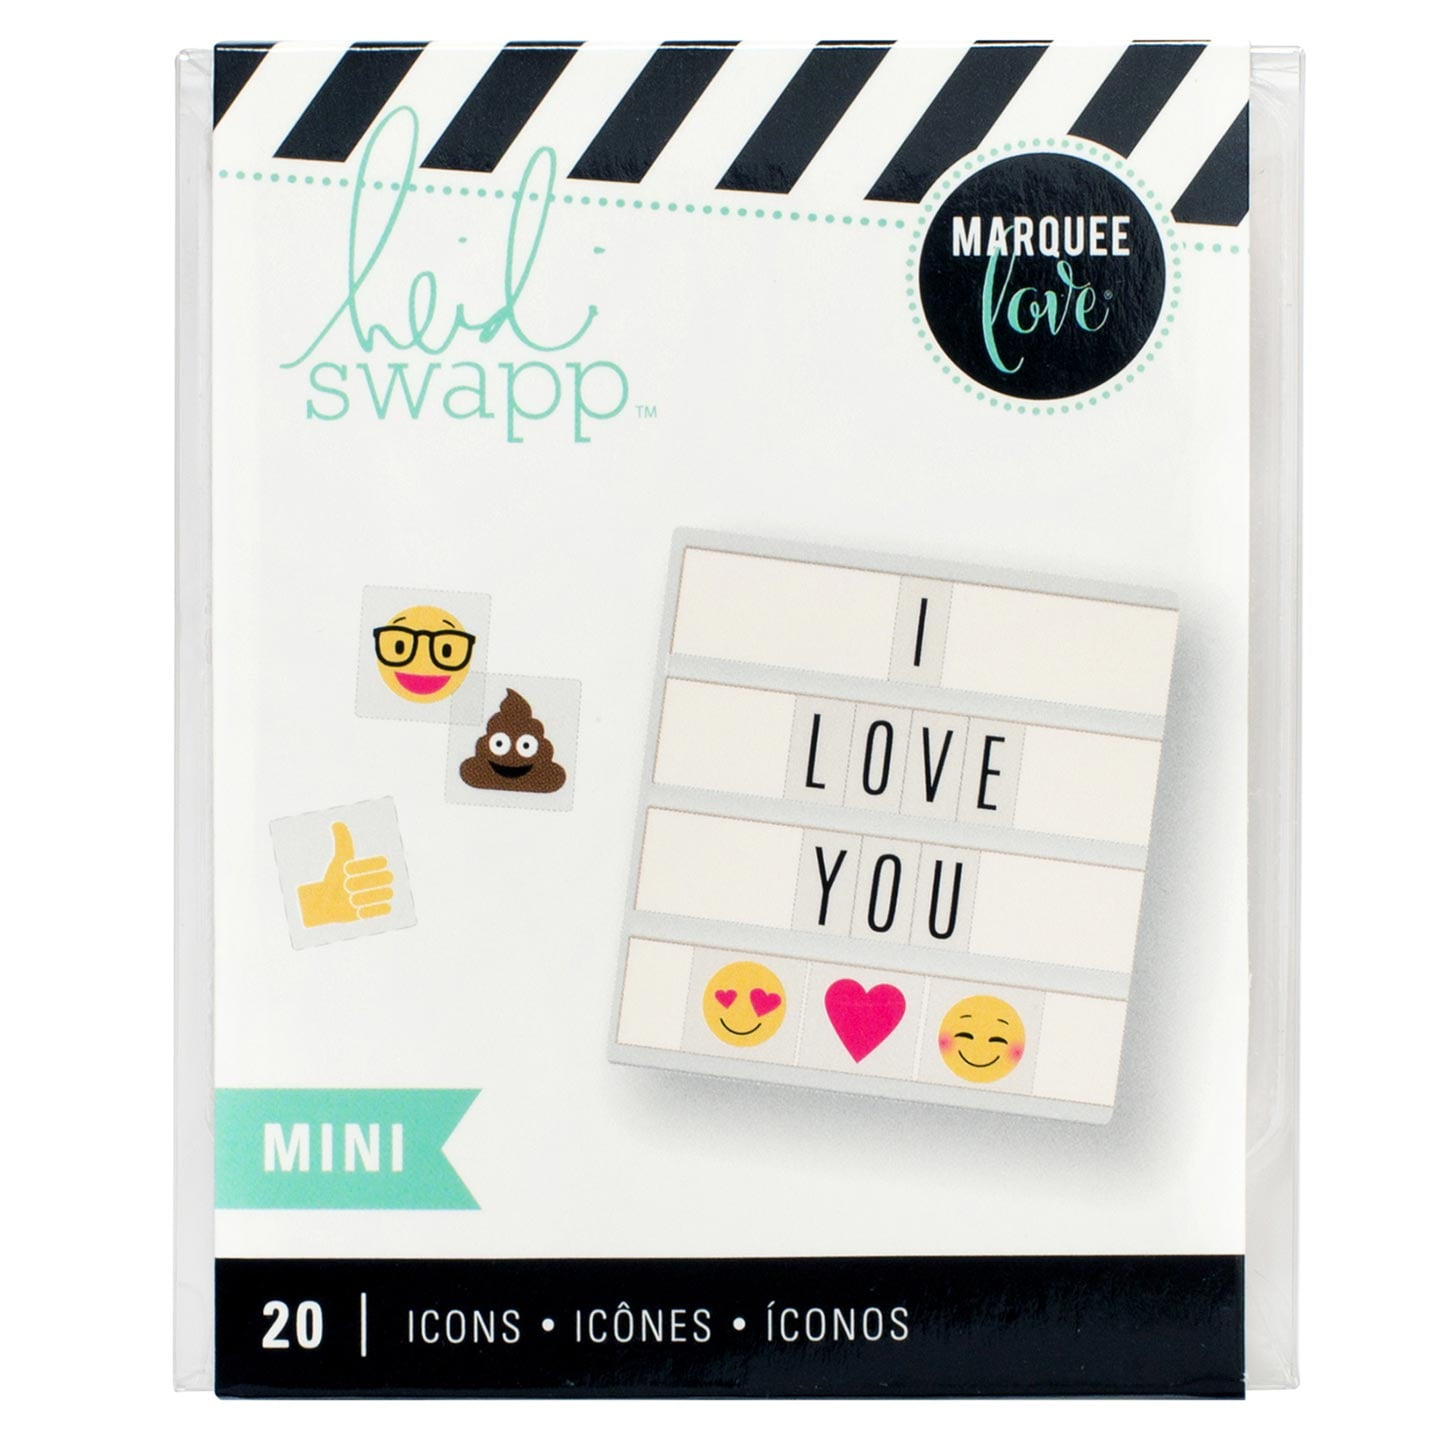 MINI Heidi Swapp Marquee Love Lightbox Inserts Letter Strip Icon Party Prop 